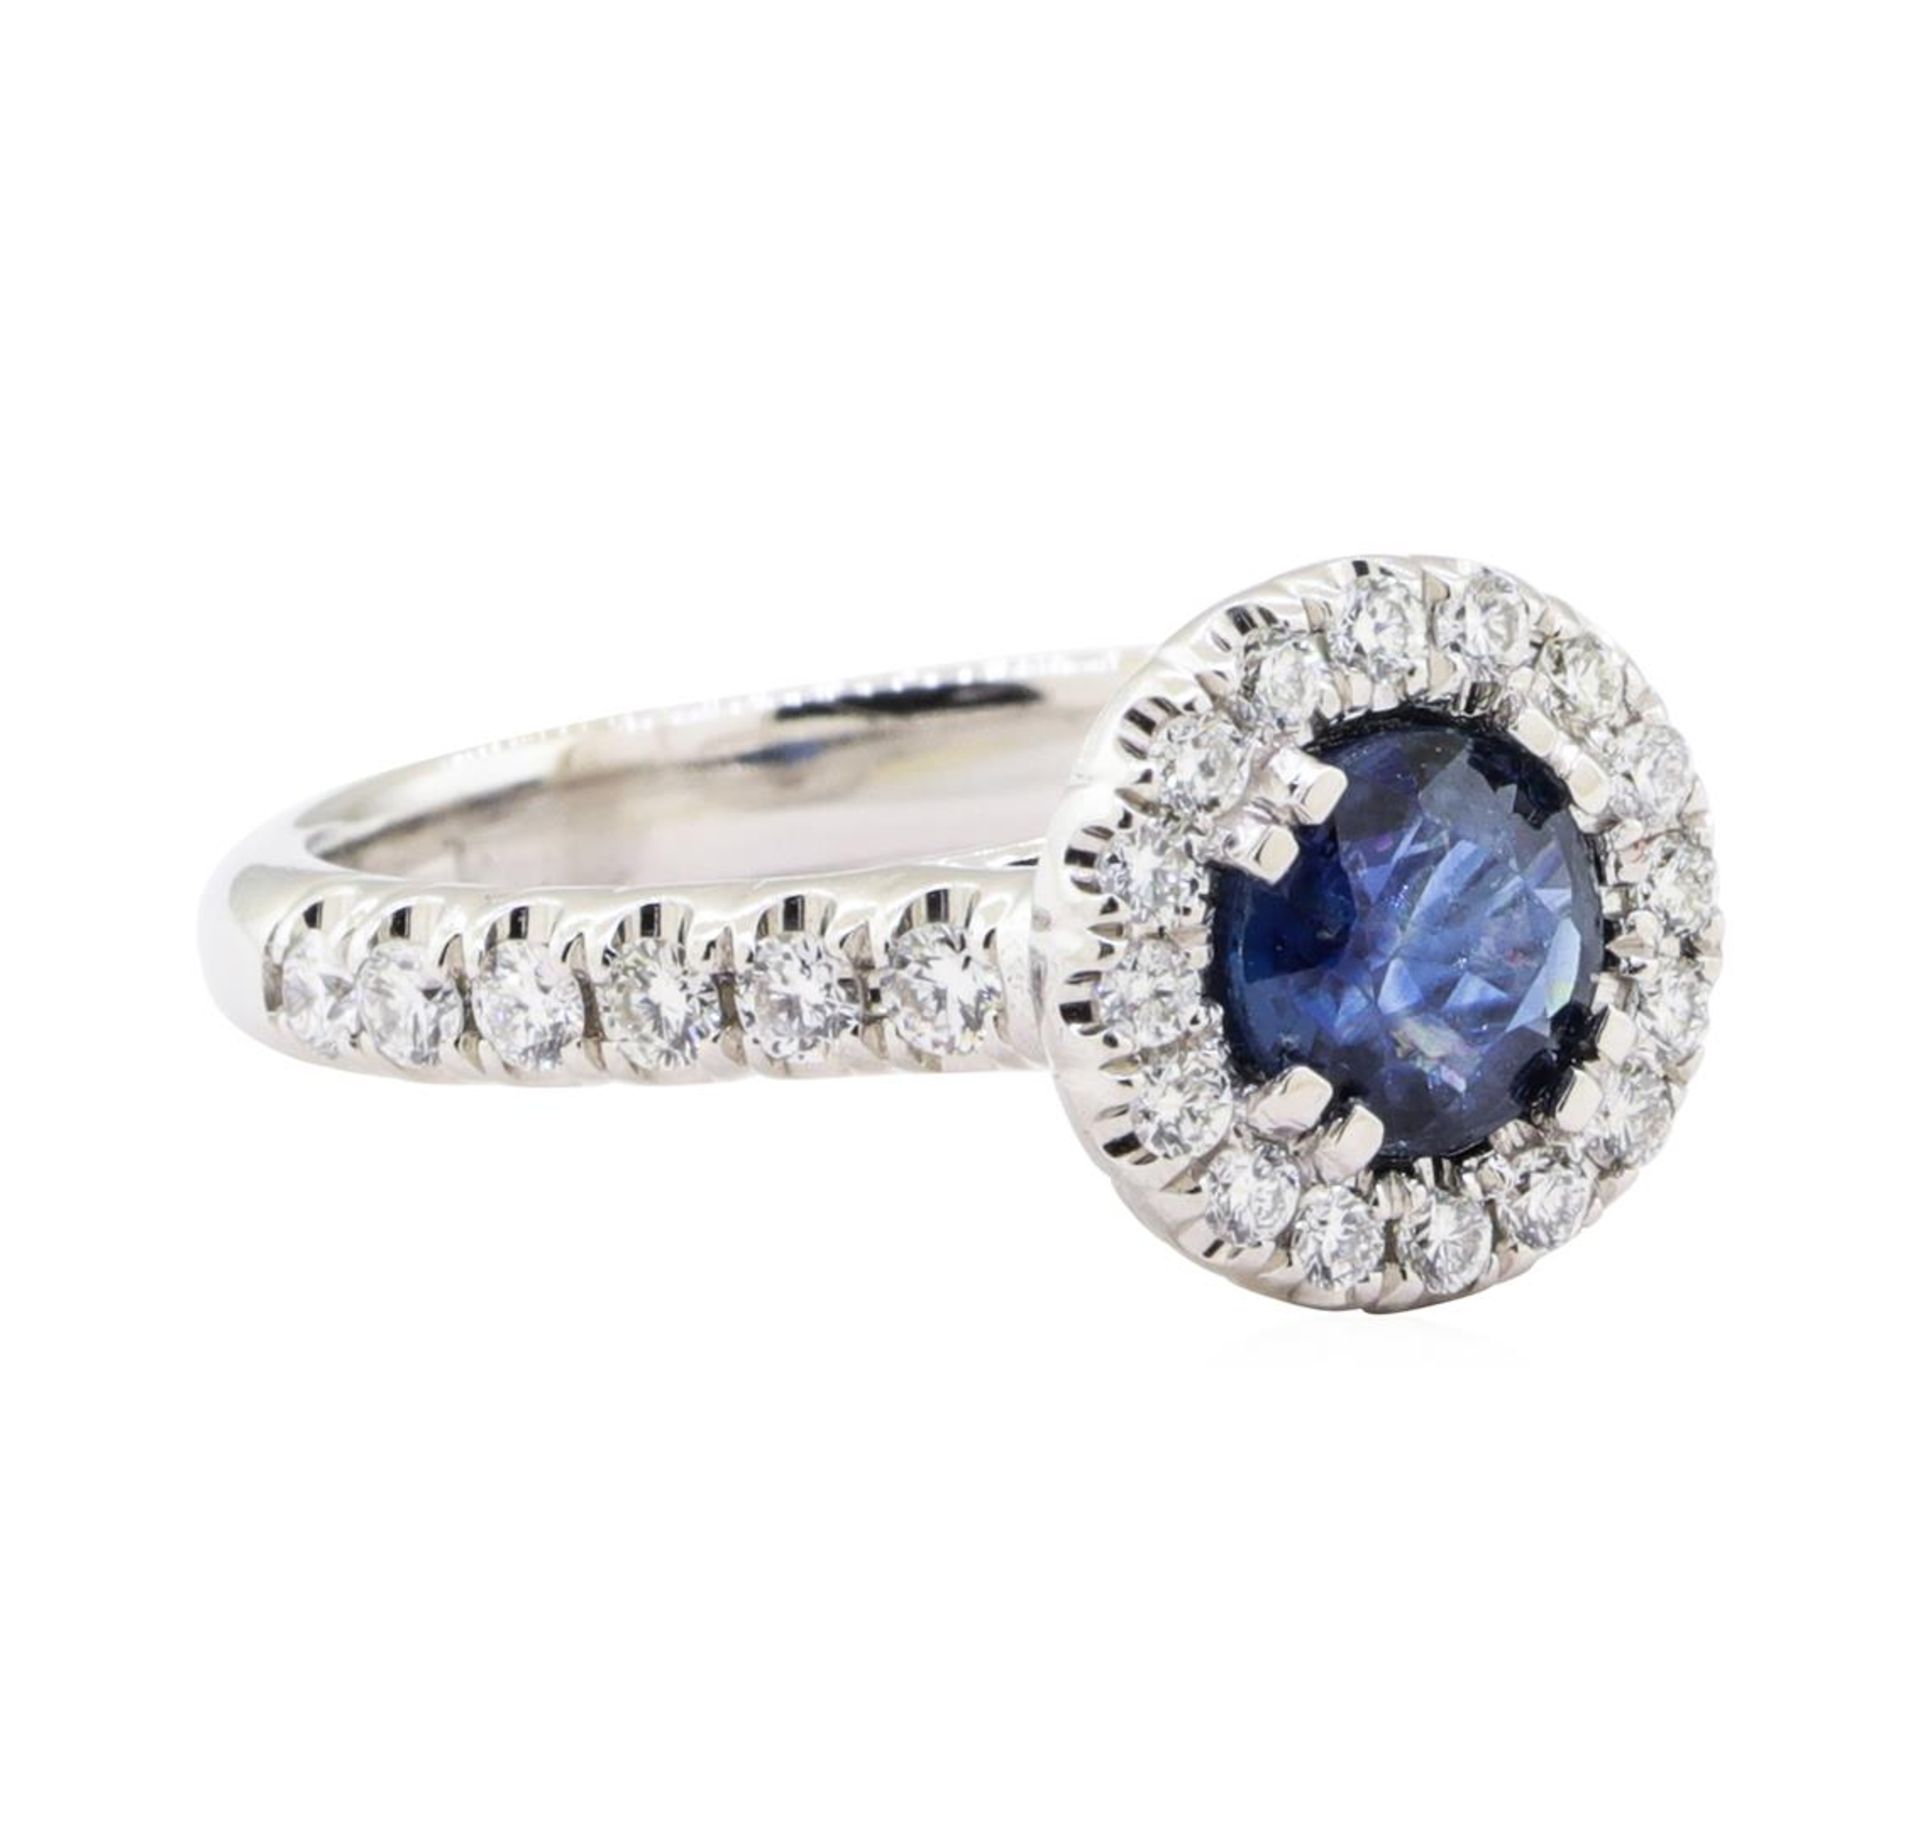 1.42 ctw Sapphire And Diamond Ring - 14KT White Gold - Image 2 of 10